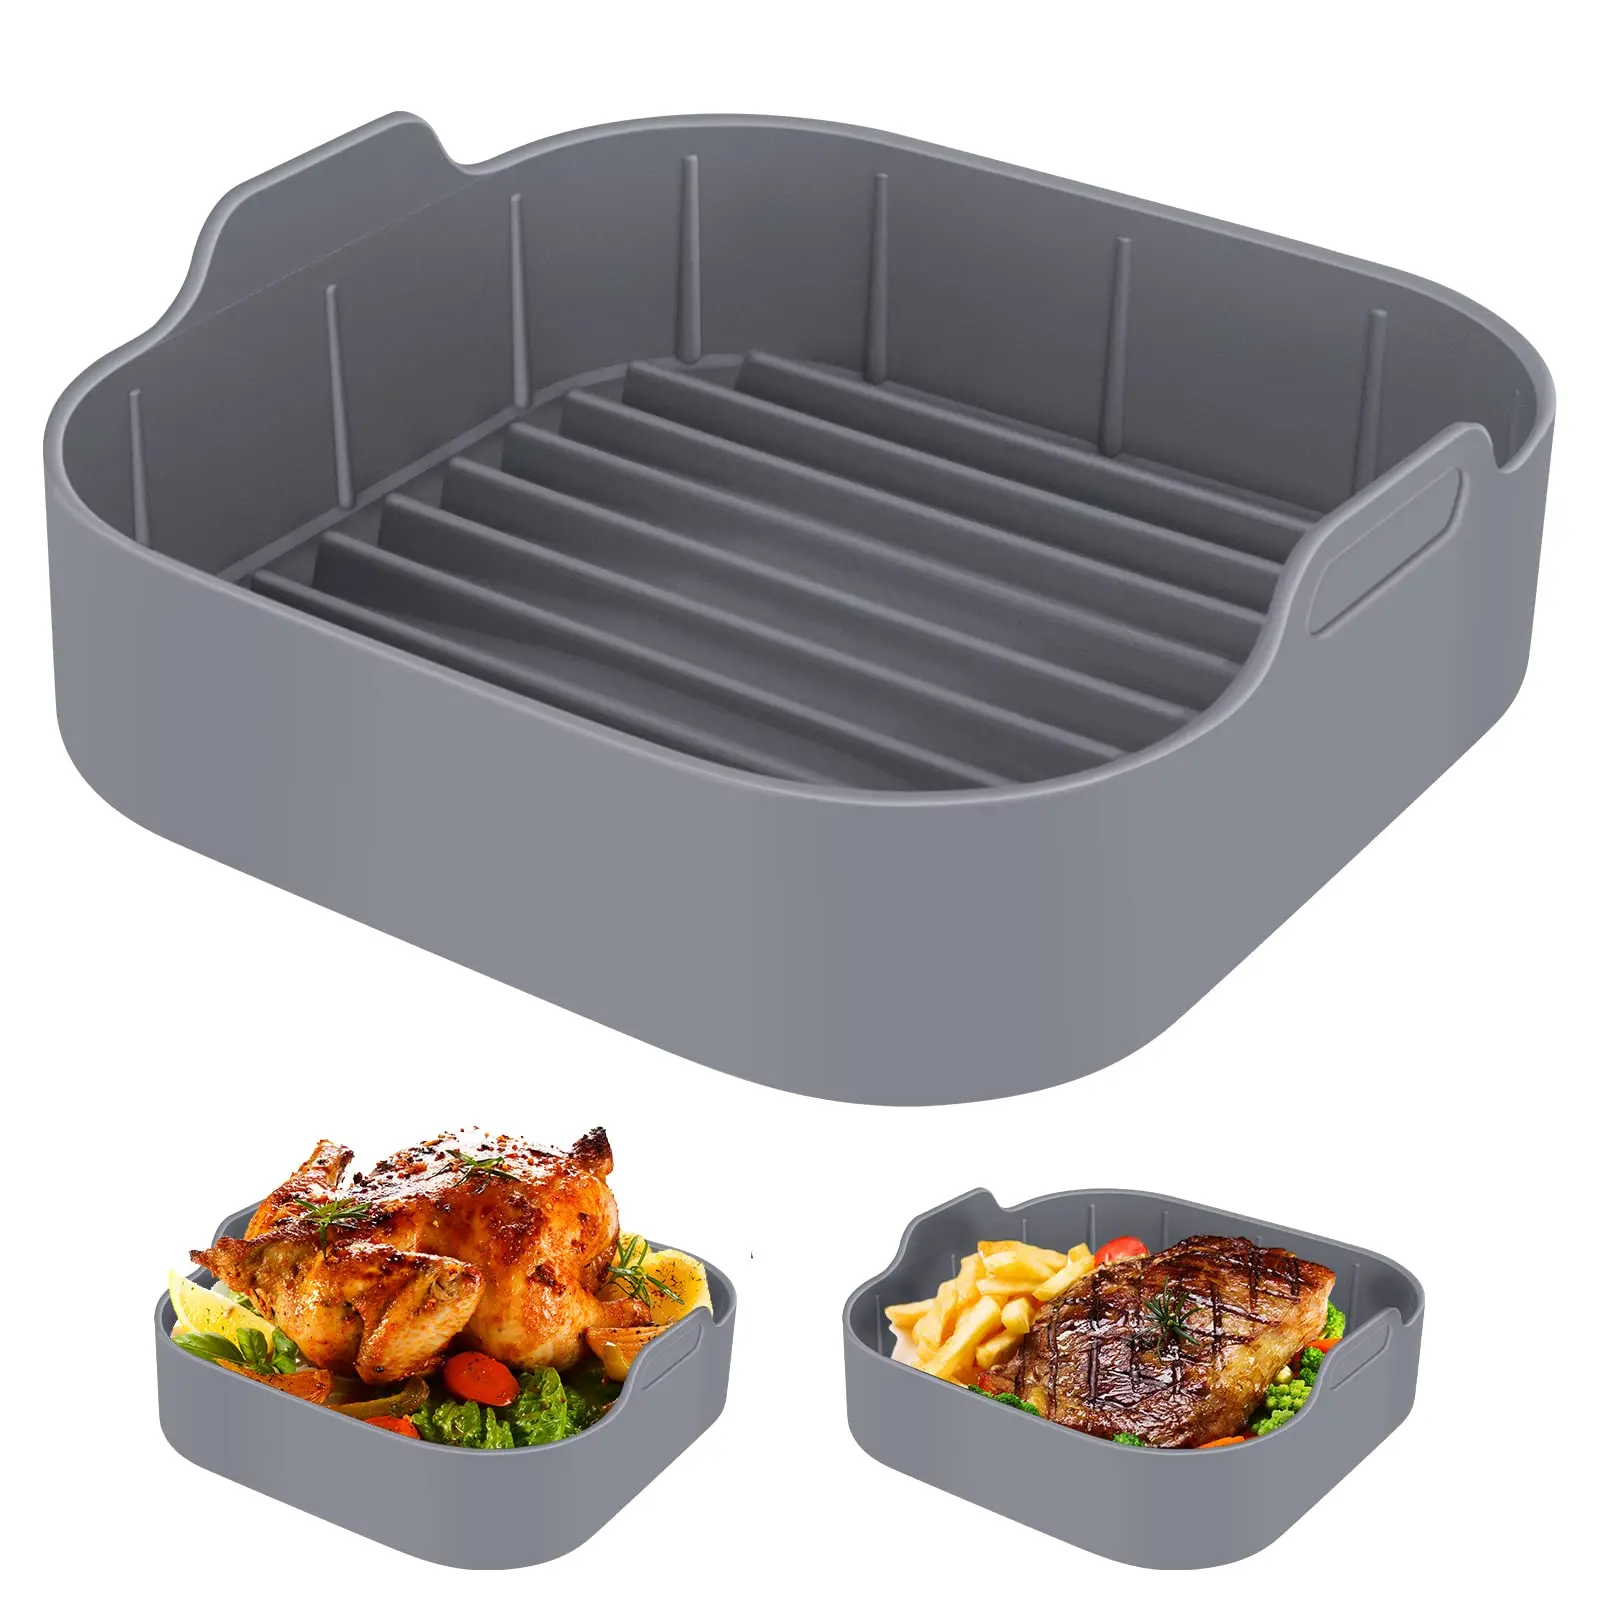 

Air Fryer Silicone Pot Bakeware Oven Baking Tray Pizza Mat Nonstick Basket Grill Pan Kitchen Cake Cooking Tools Accessories